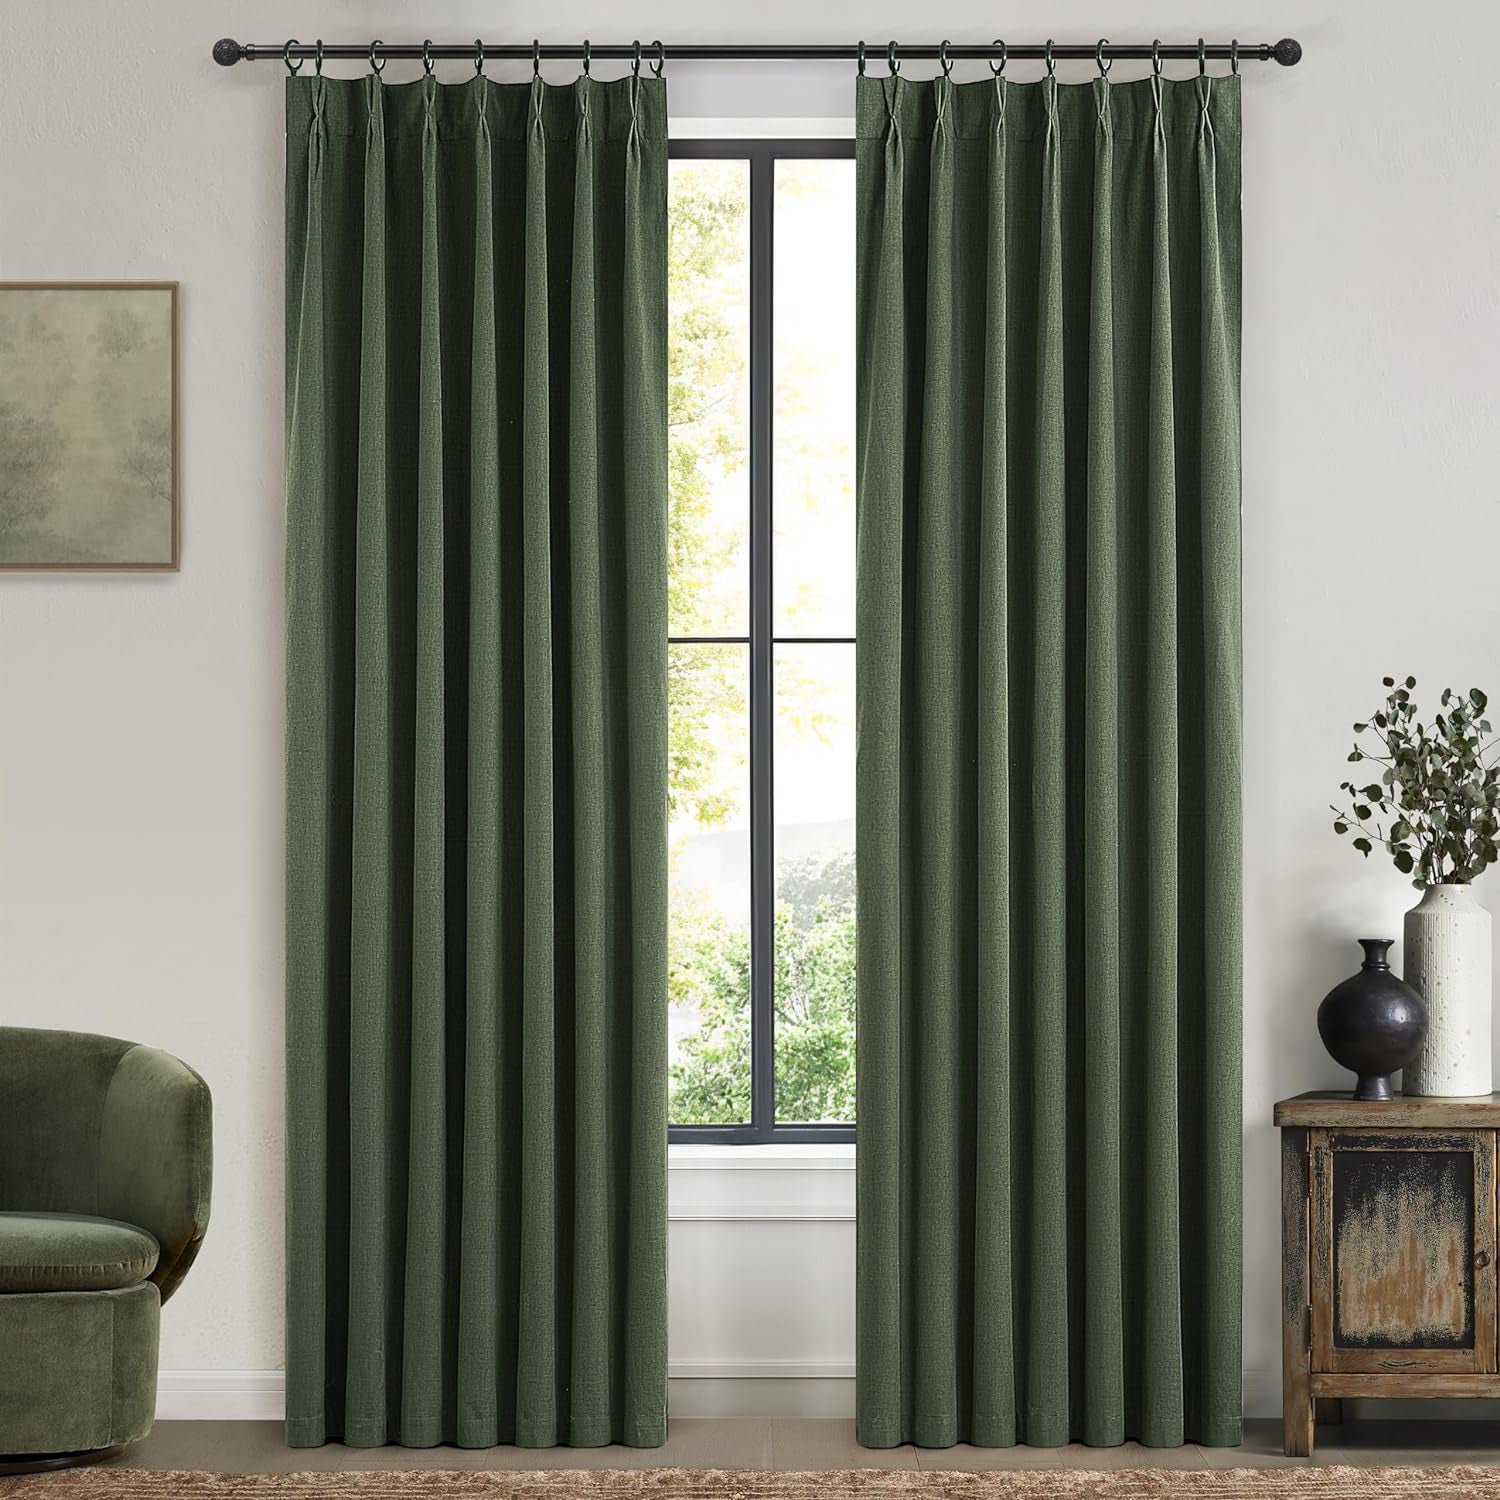 Natural Linen Pinch Pleated Blackout Curtains & Drapes 96 Inch Long Bedroom/Livingroom Farmhouse Curtains 2 Panel Sets, Neutral Track Room Darkening Thermal Insulated 8Ft Back Tab Window Curtain  QJmydeco Loden 40"W X 90"L X 2 Panels 